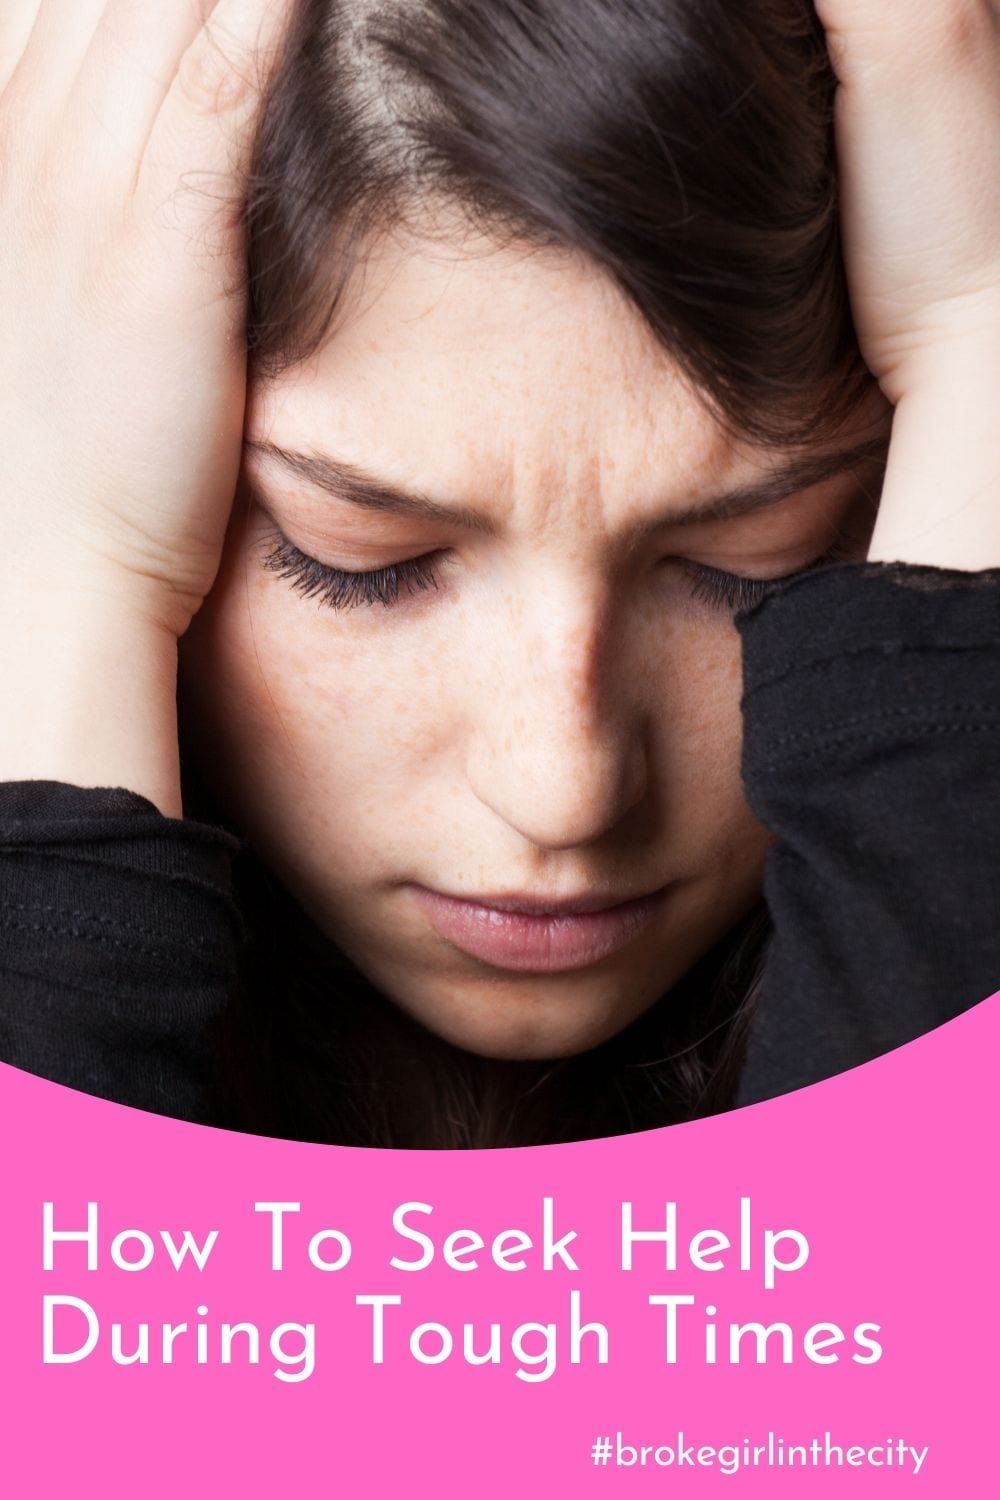 How To Seek Help During Tough Times